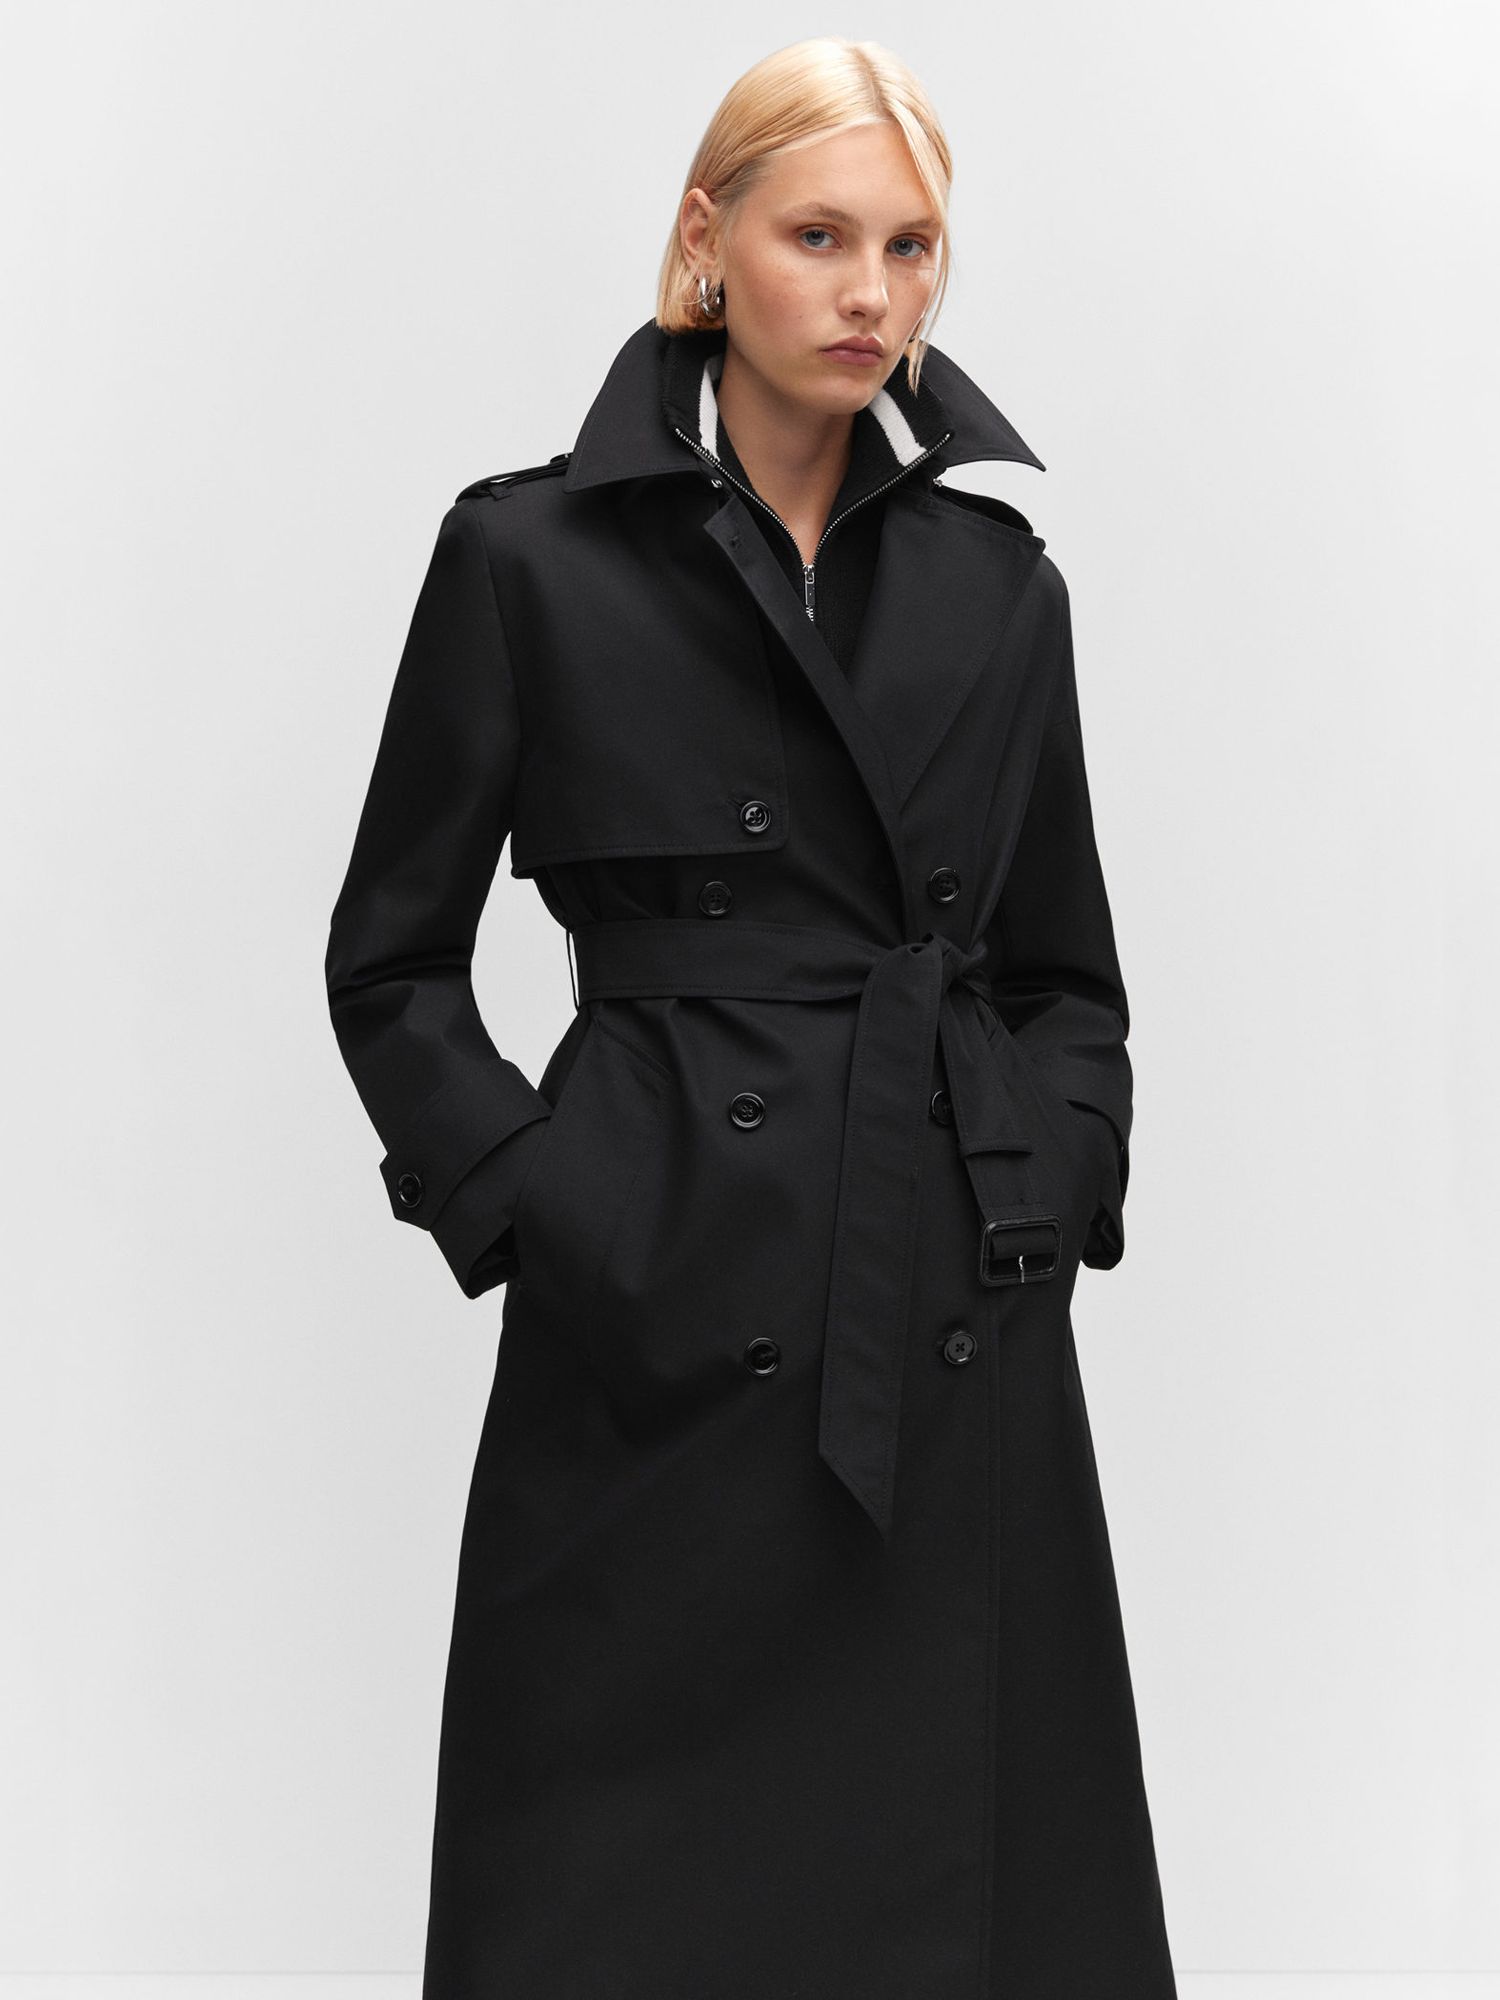 Mango Chicago Waterproof Double Breasted Trench Coat, Black, XXS